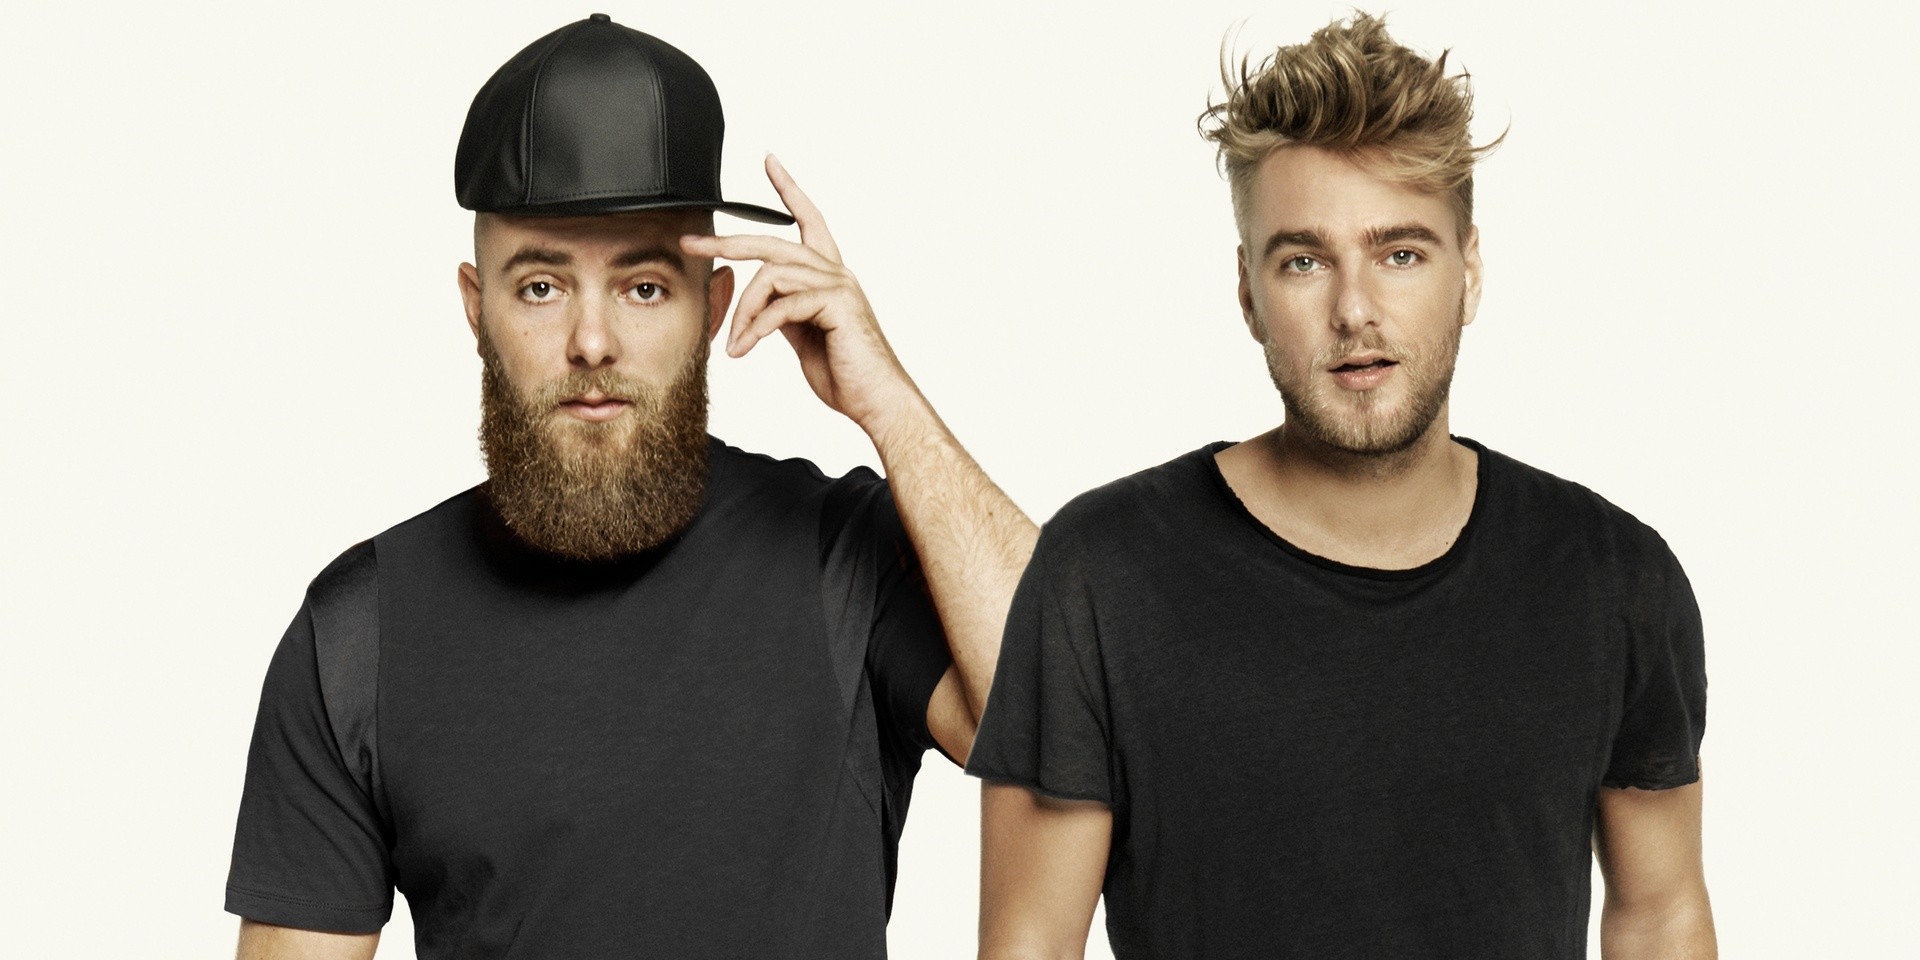 "I think we've done pretty well so far": An interview with Showtek